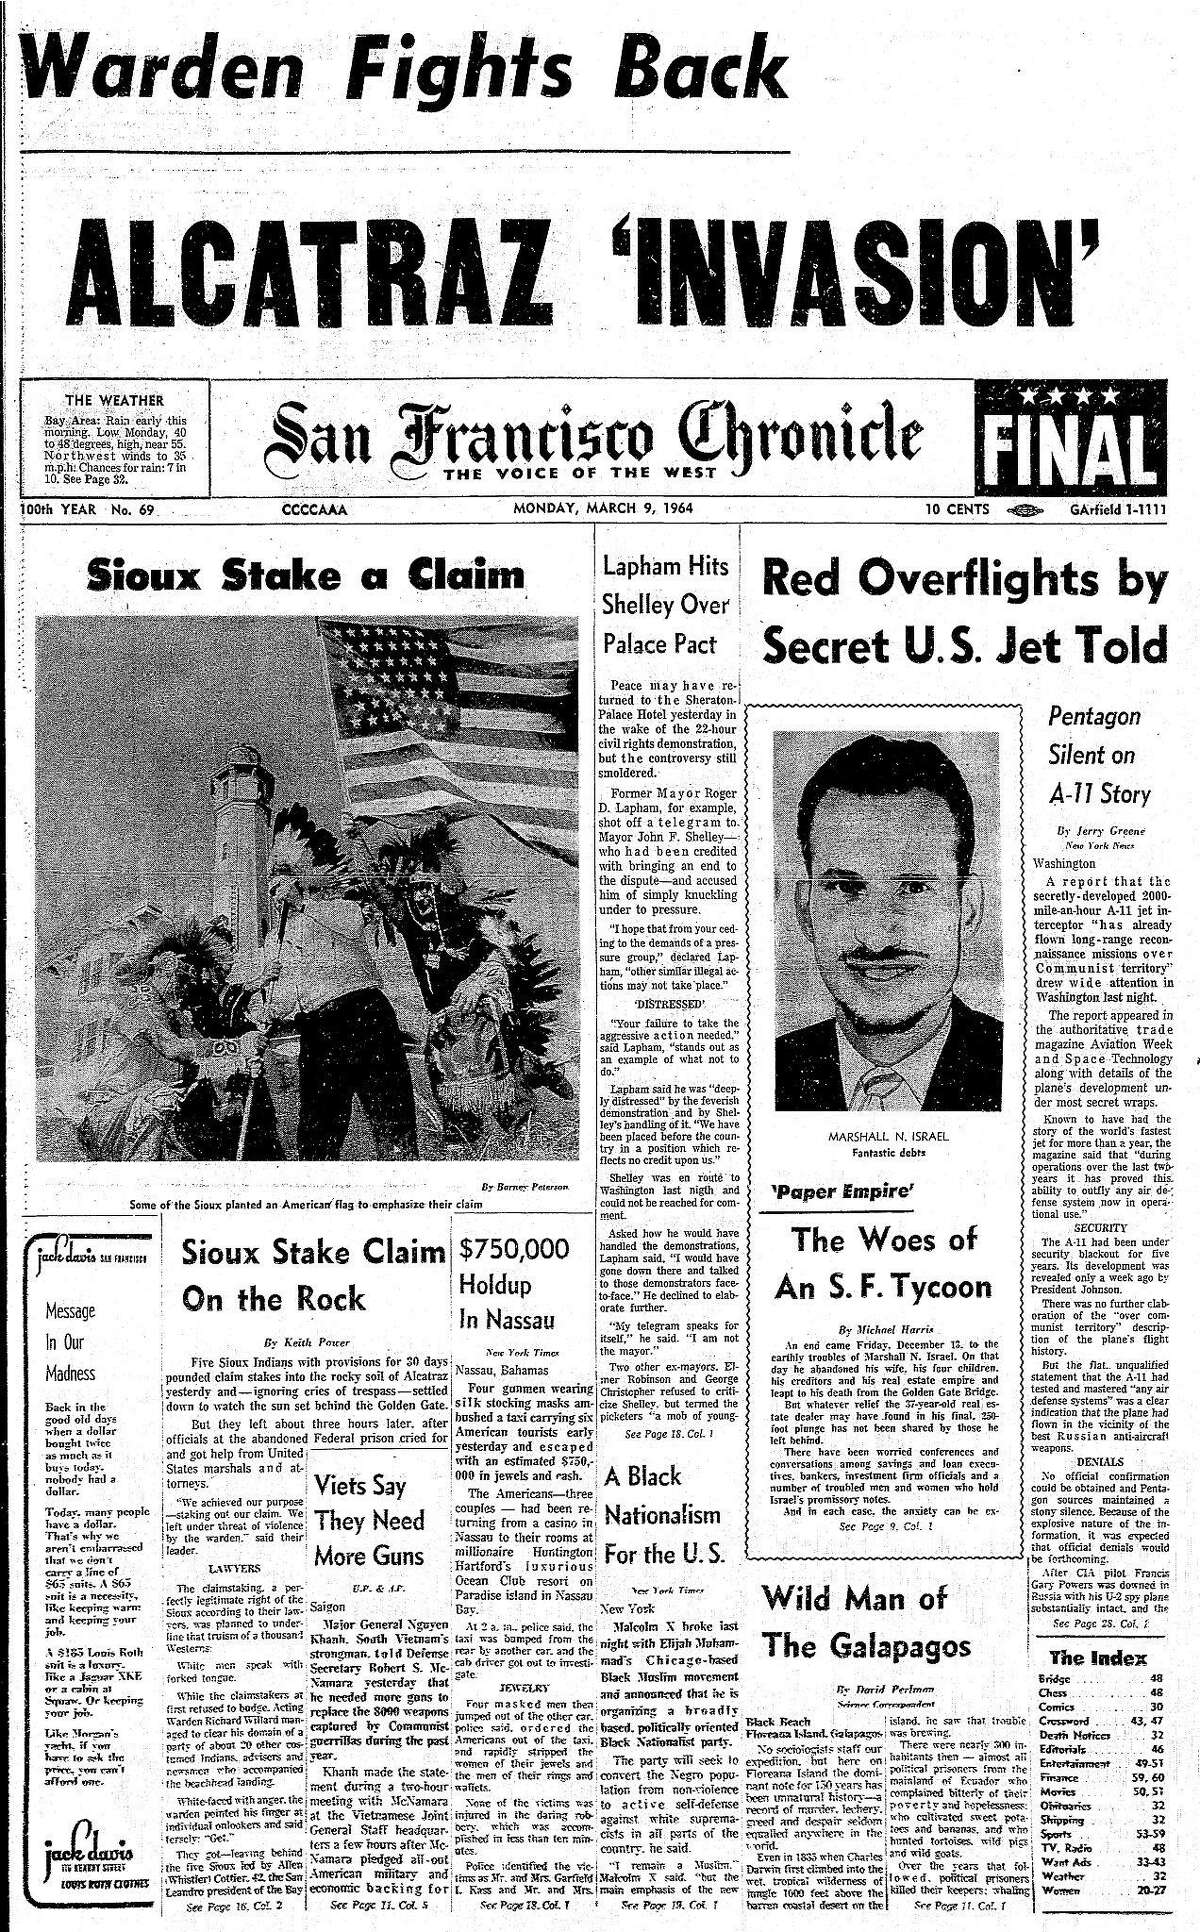 March 9, 1964 Chronicle front page coverage of a group of Sioux Indians who take a boat to Alcatraz, the former island federal prison, and claimed it for the Indian nation